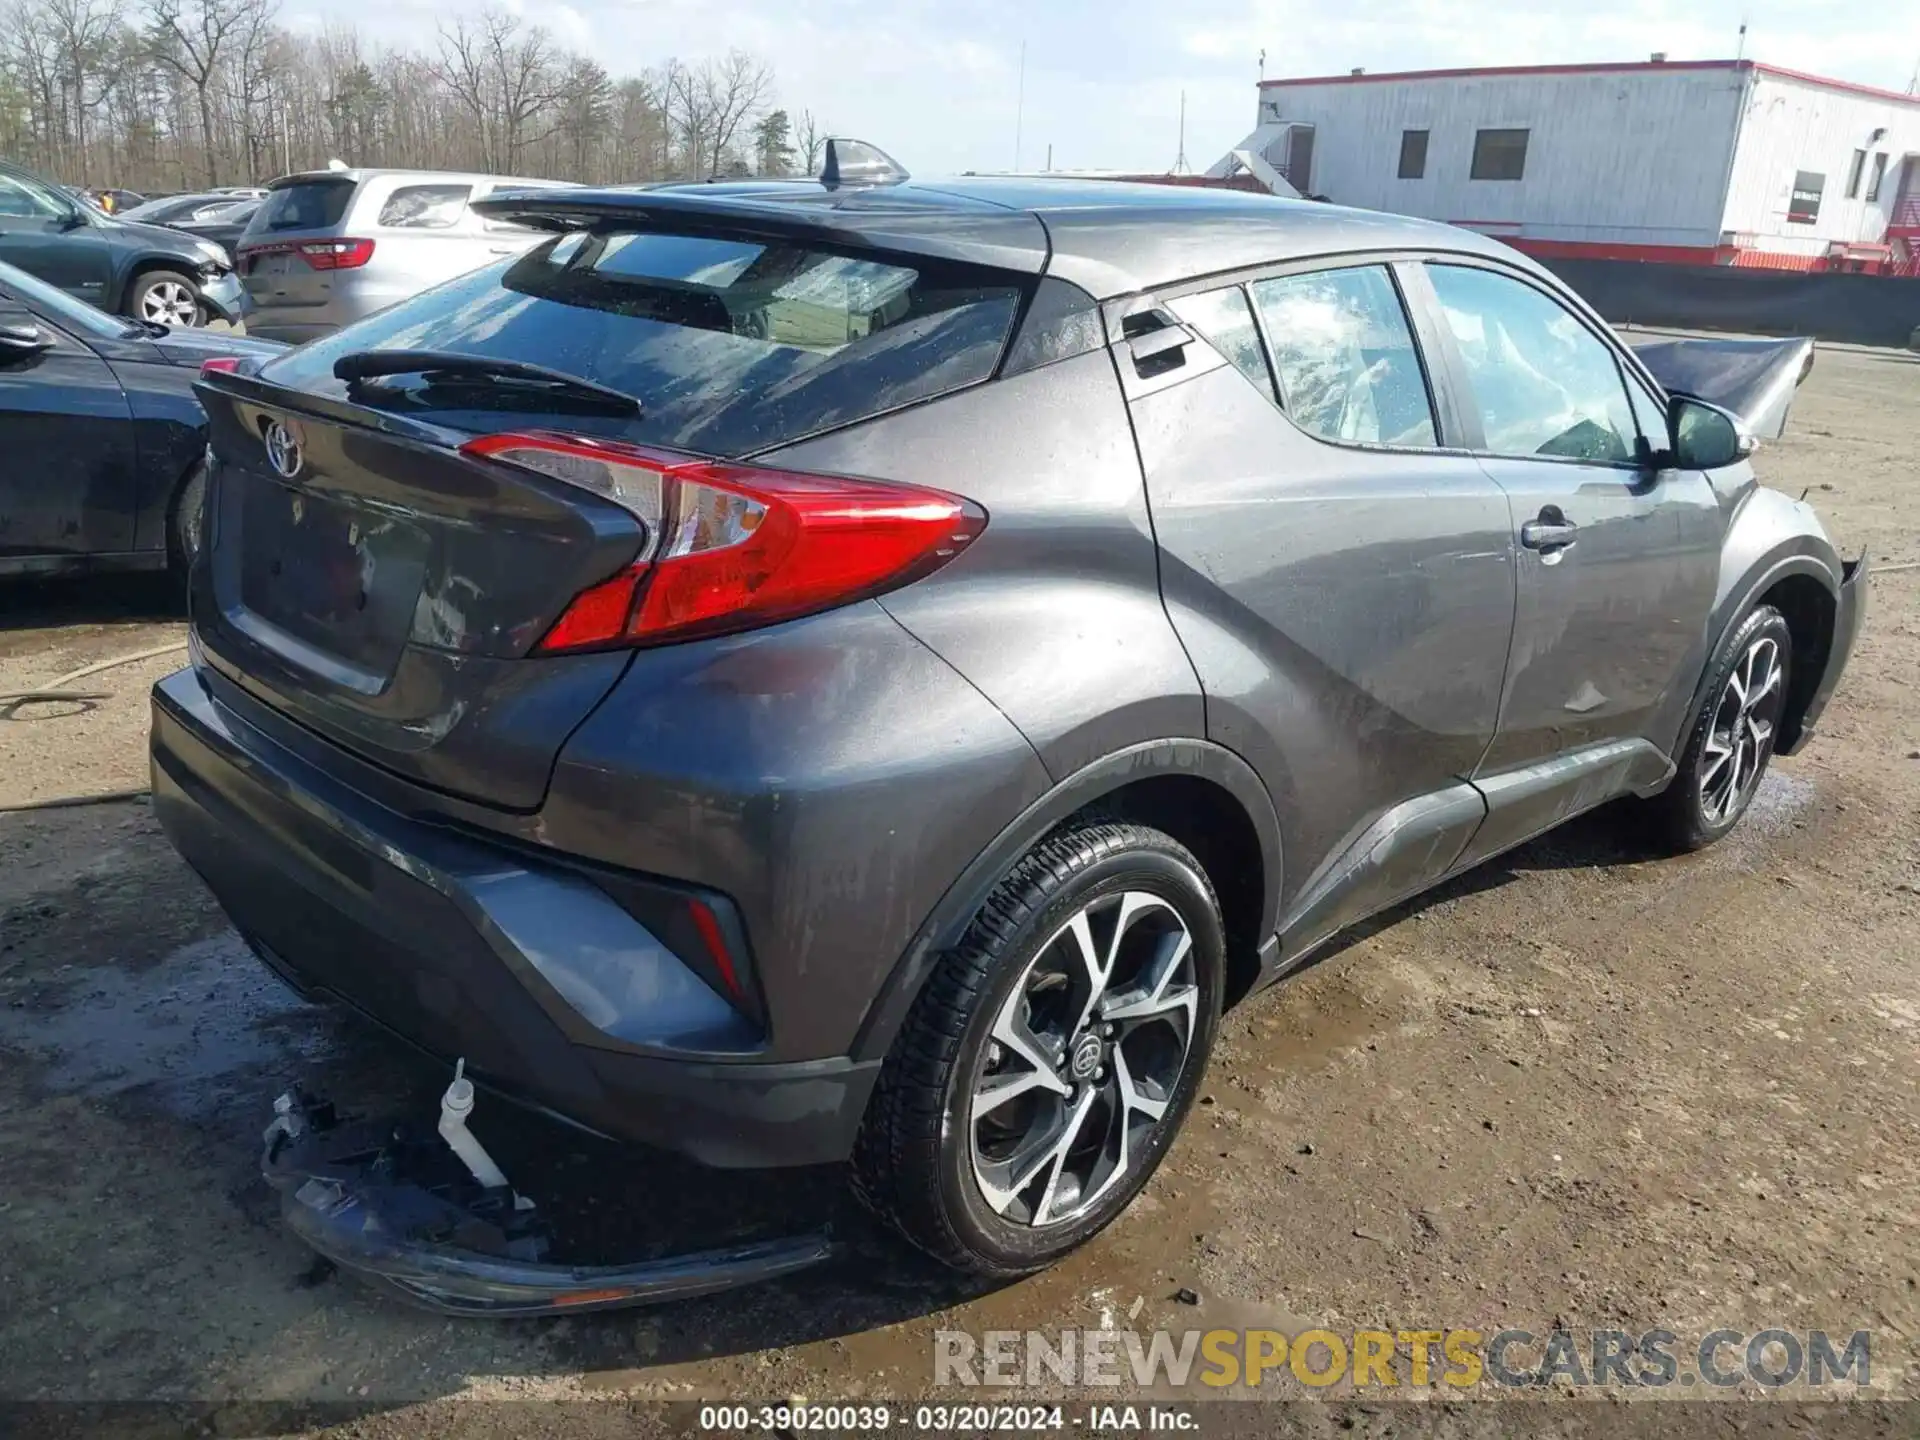 4 Photograph of a damaged car NMTKHMBXXNR145634 TOYOTA C-HR 2022